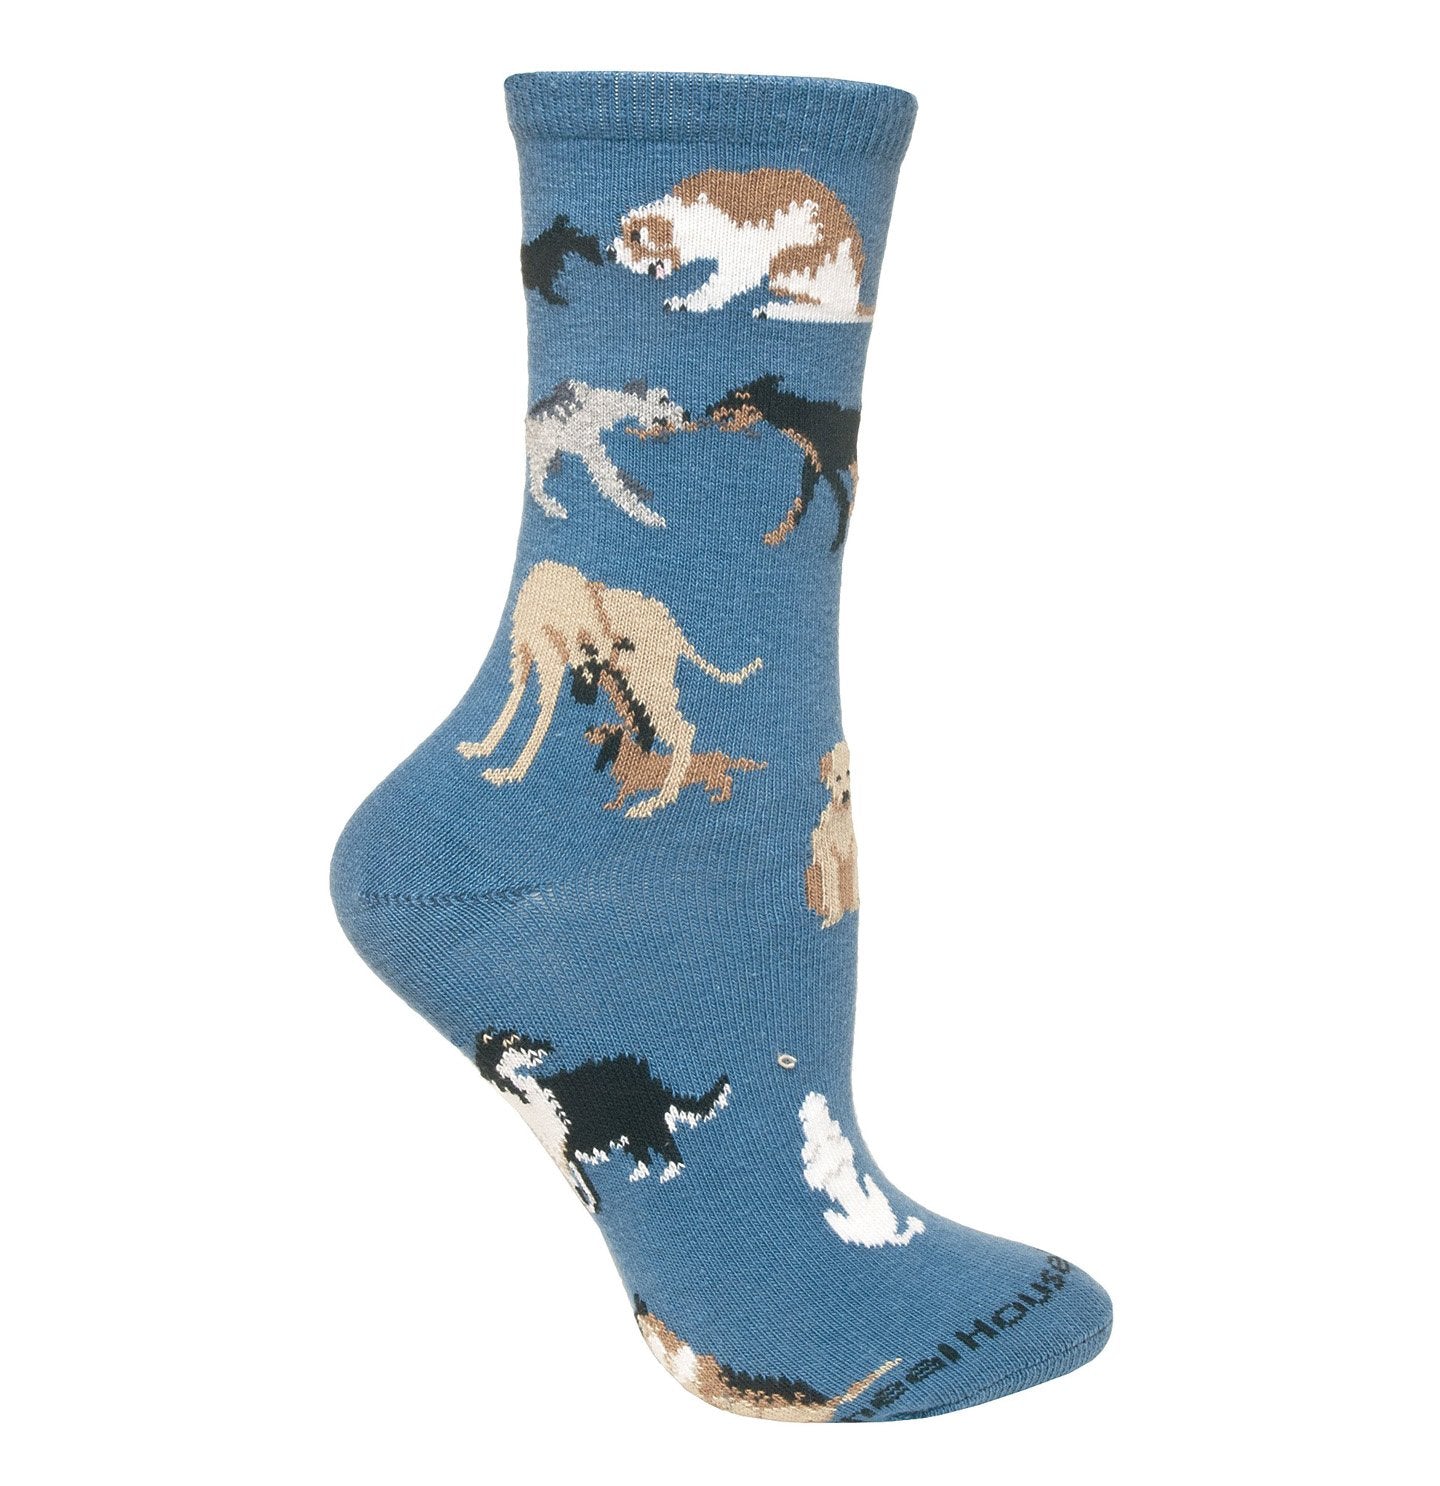 Animal Pride - Dogs All Over on Blue - Adult Cotton Crew Socks